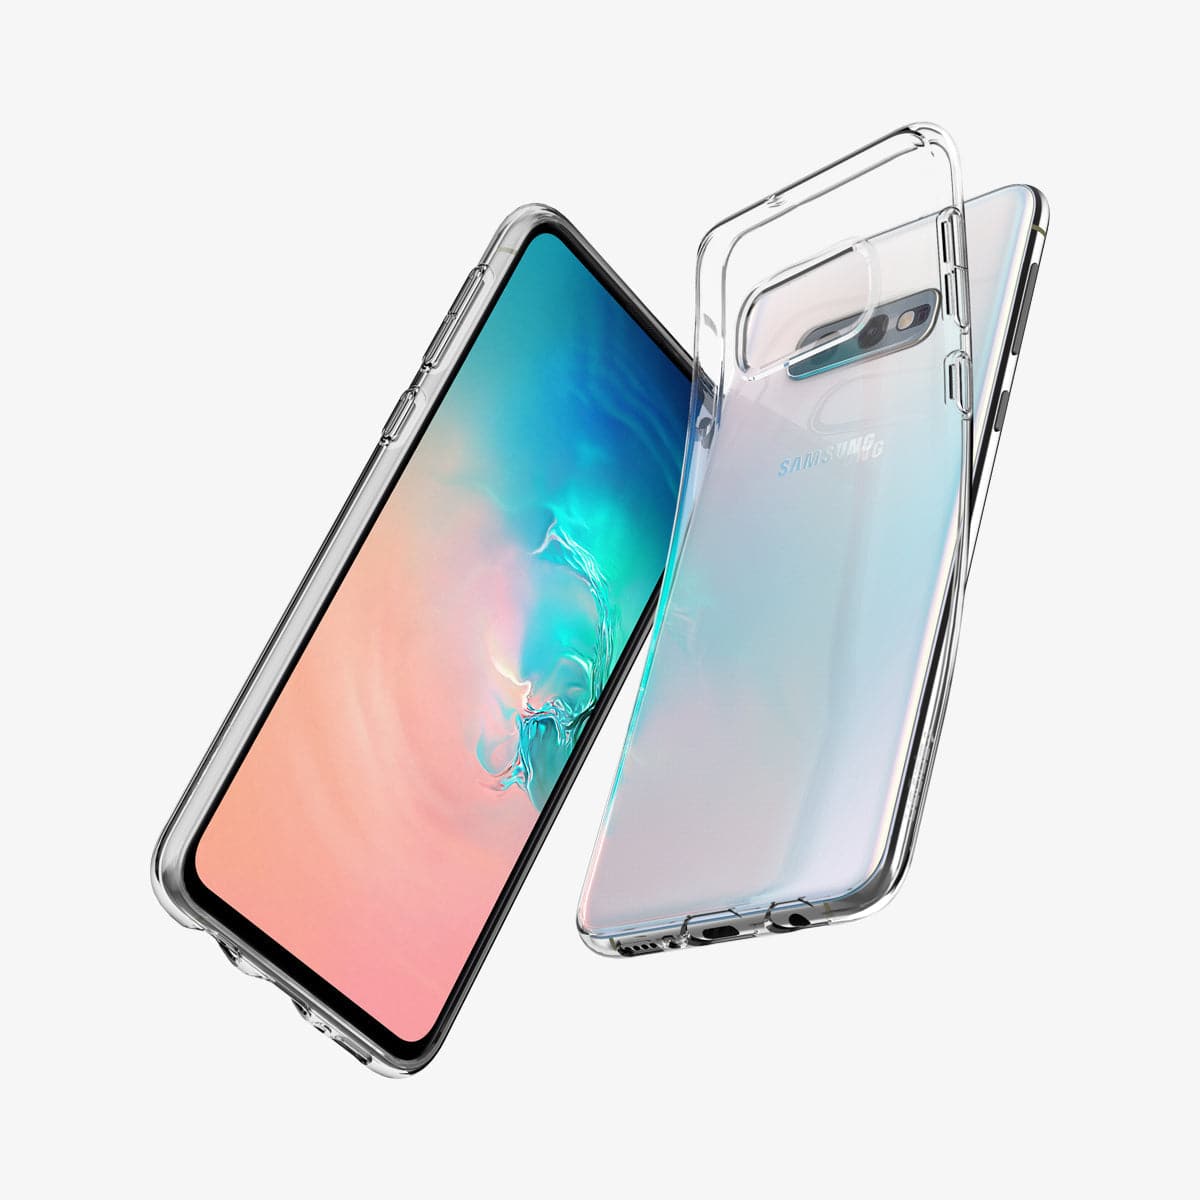 609CS25833 - Galaxy S10e Liquid Crystal Case in crystal clear showing the back, front and sides